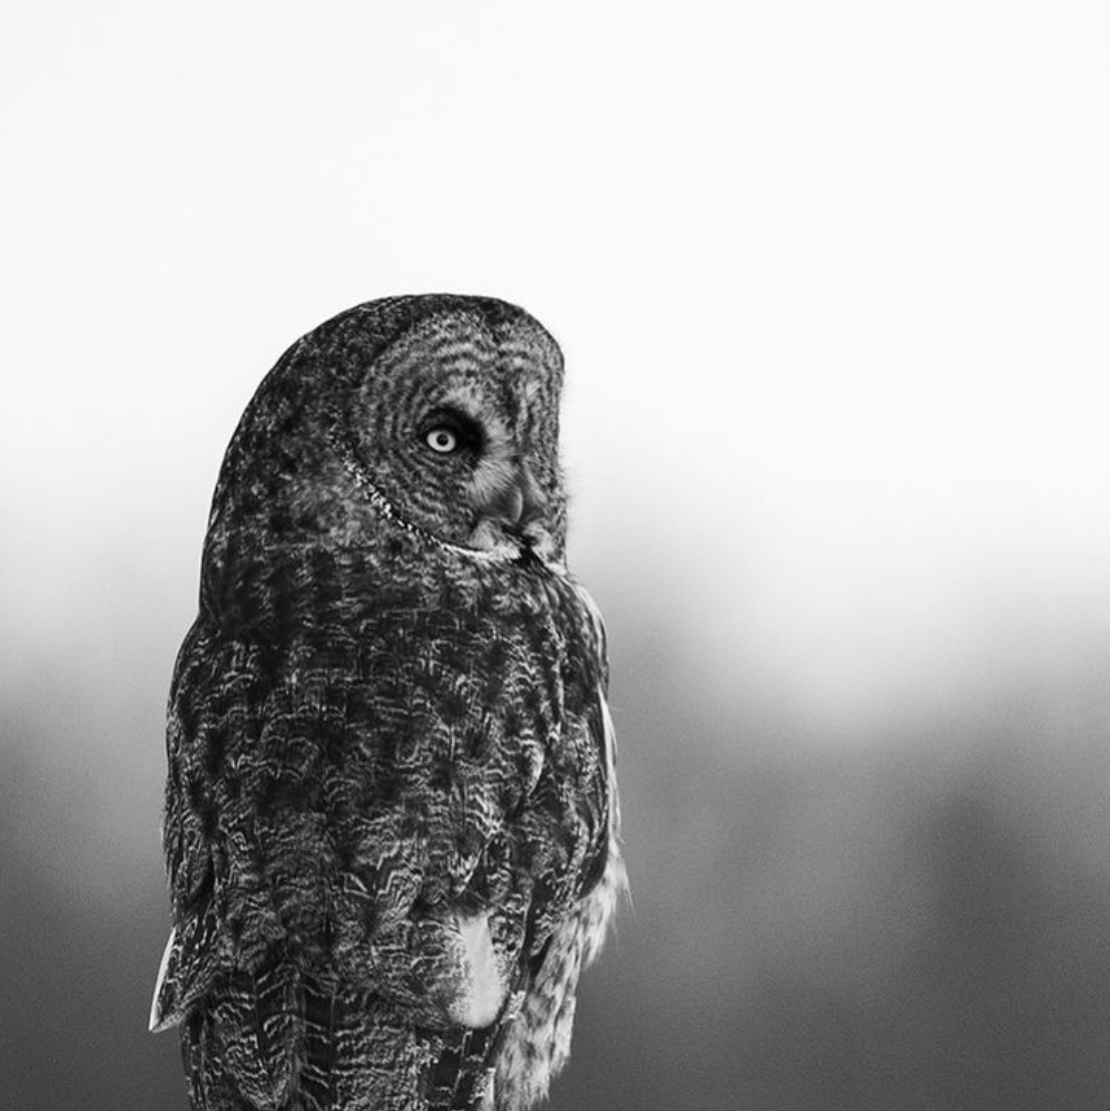 Across the country, we're fortunate to have an abundance of wild places and wild species to connect with. Check out this stunning great grey owl sighting in #KananaskisCountry captured by Chad & Andi Larsen of Thirteenth Avenue Photography! #NationalWildlifeWeek